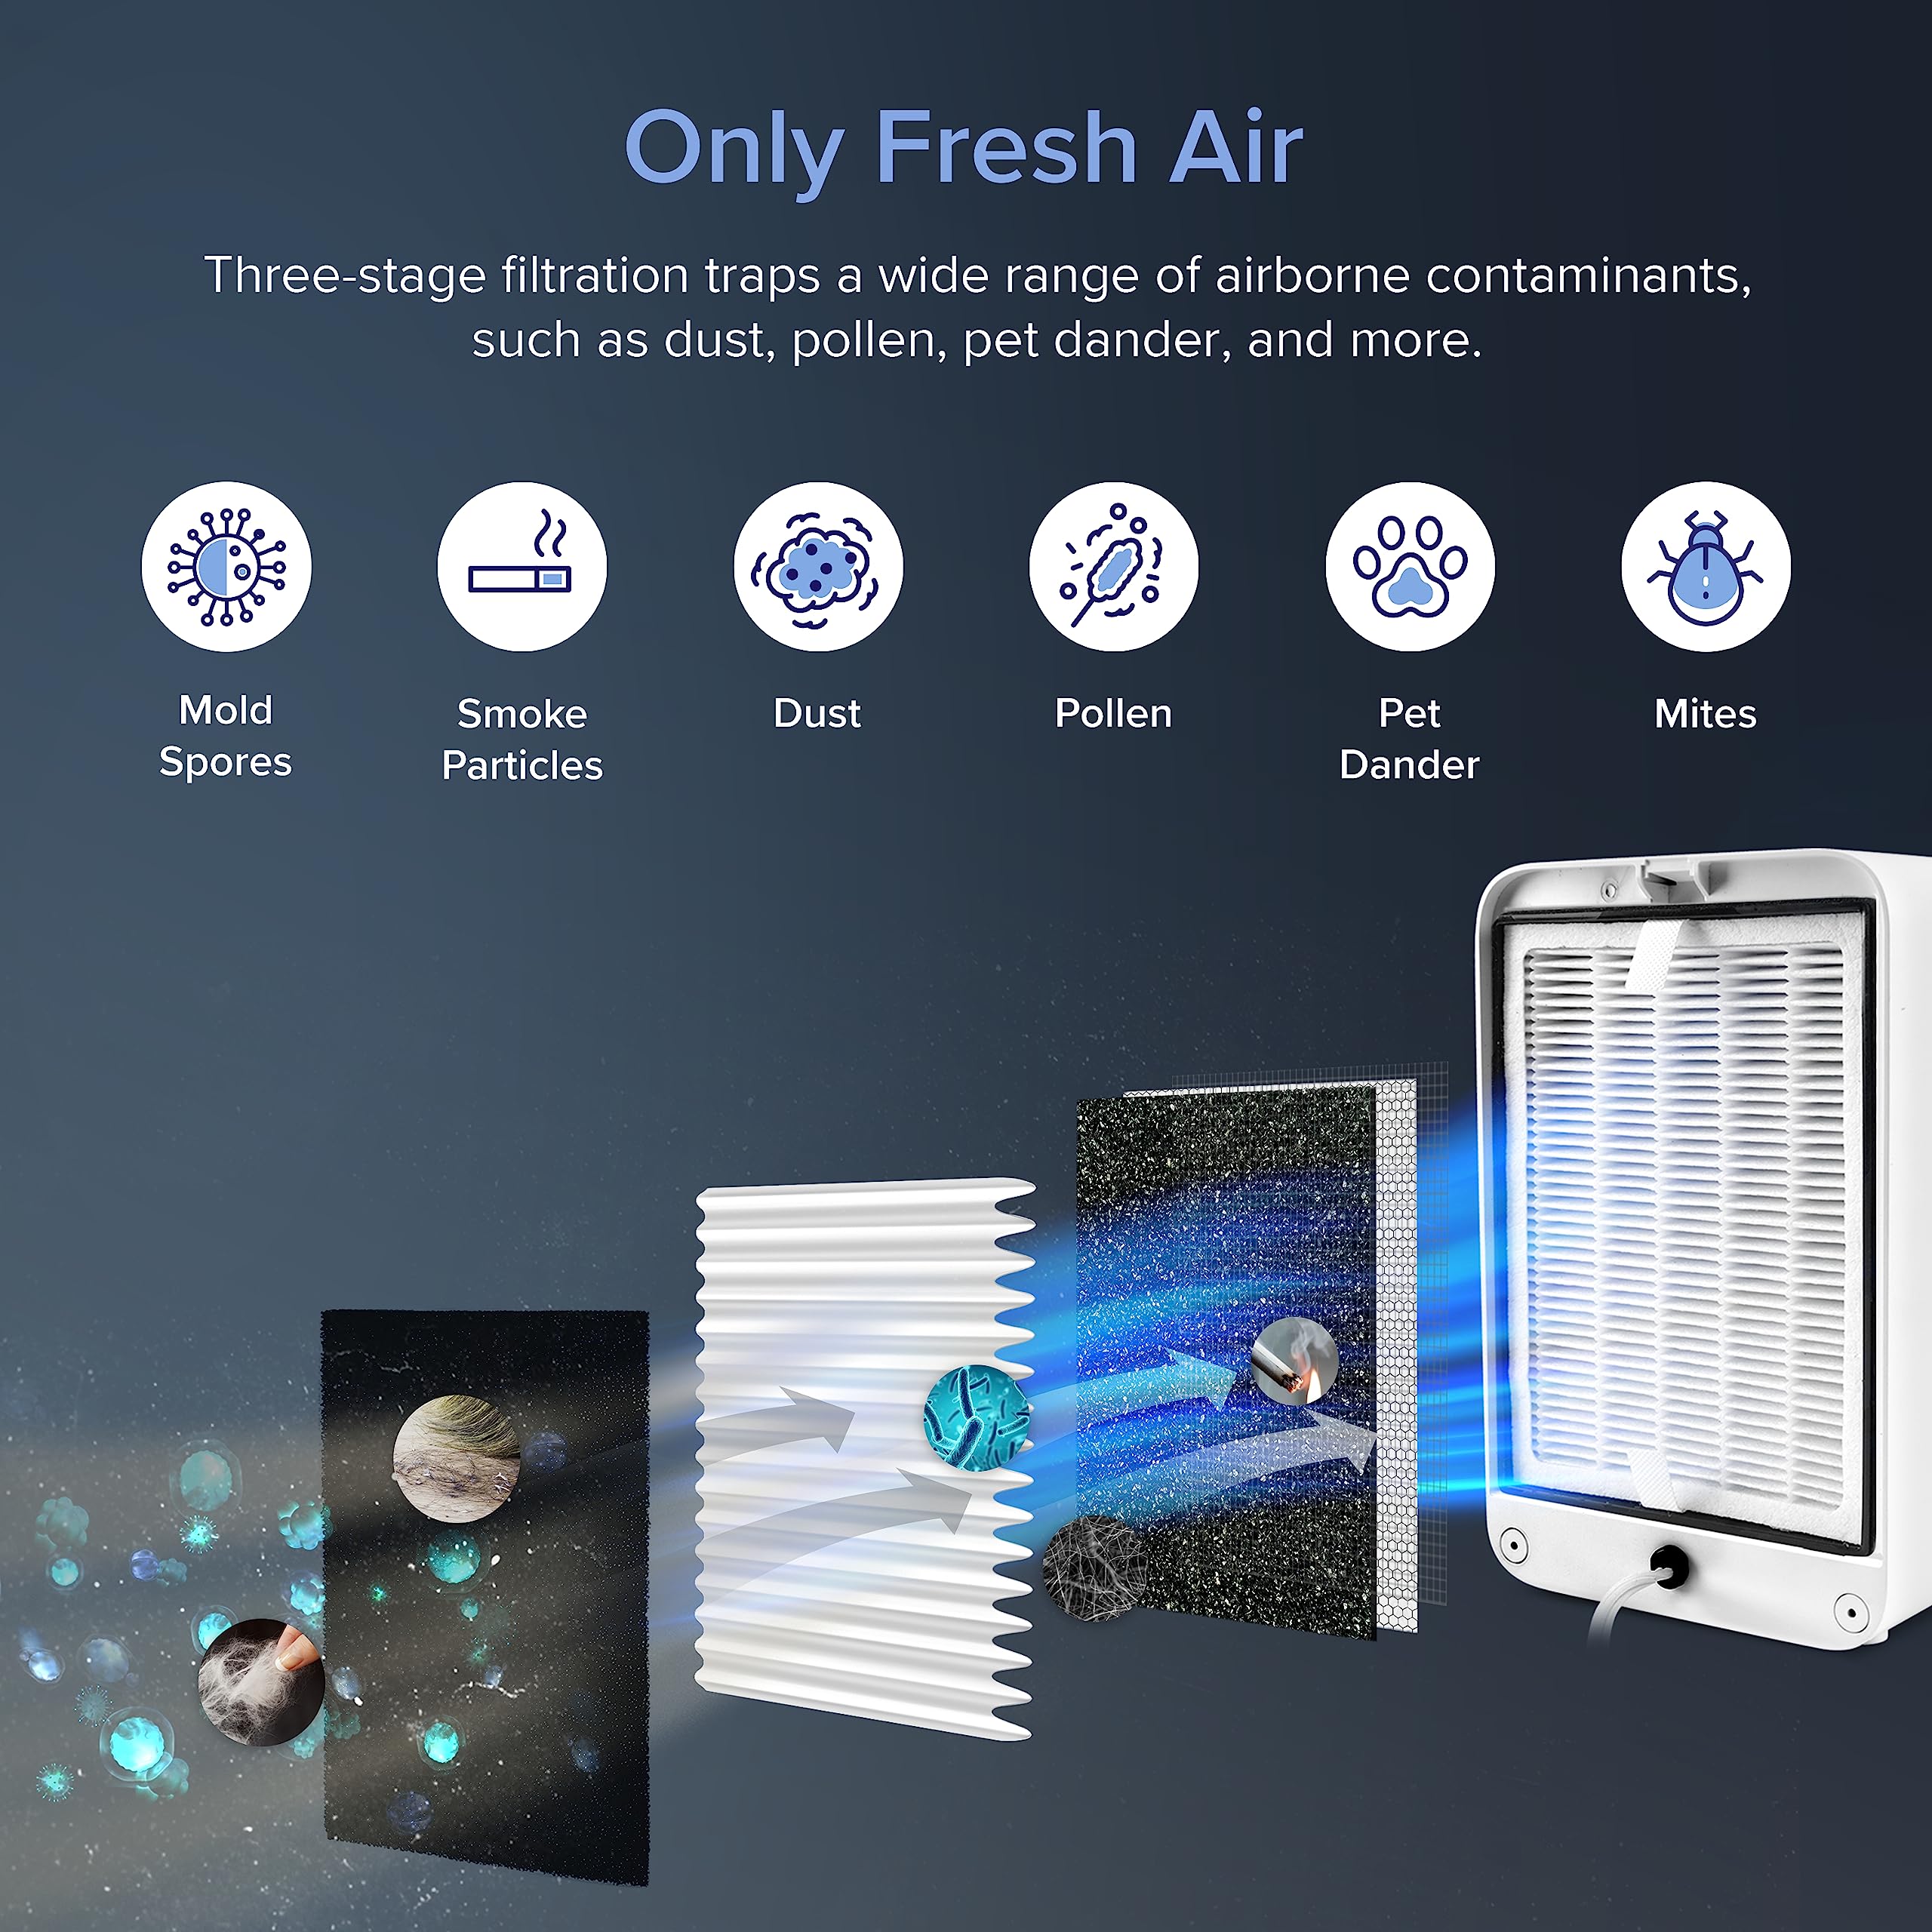 LEVOIT Air Purifiers for Bedroom Home, HEPA Freshener Filter Small Room for Smoke, Allergies, Pet Dander, Pollen, Odor, Dust Remover, Ozone Free, Quiet, Desktop, Office, Table Top, LV-H126, Beige